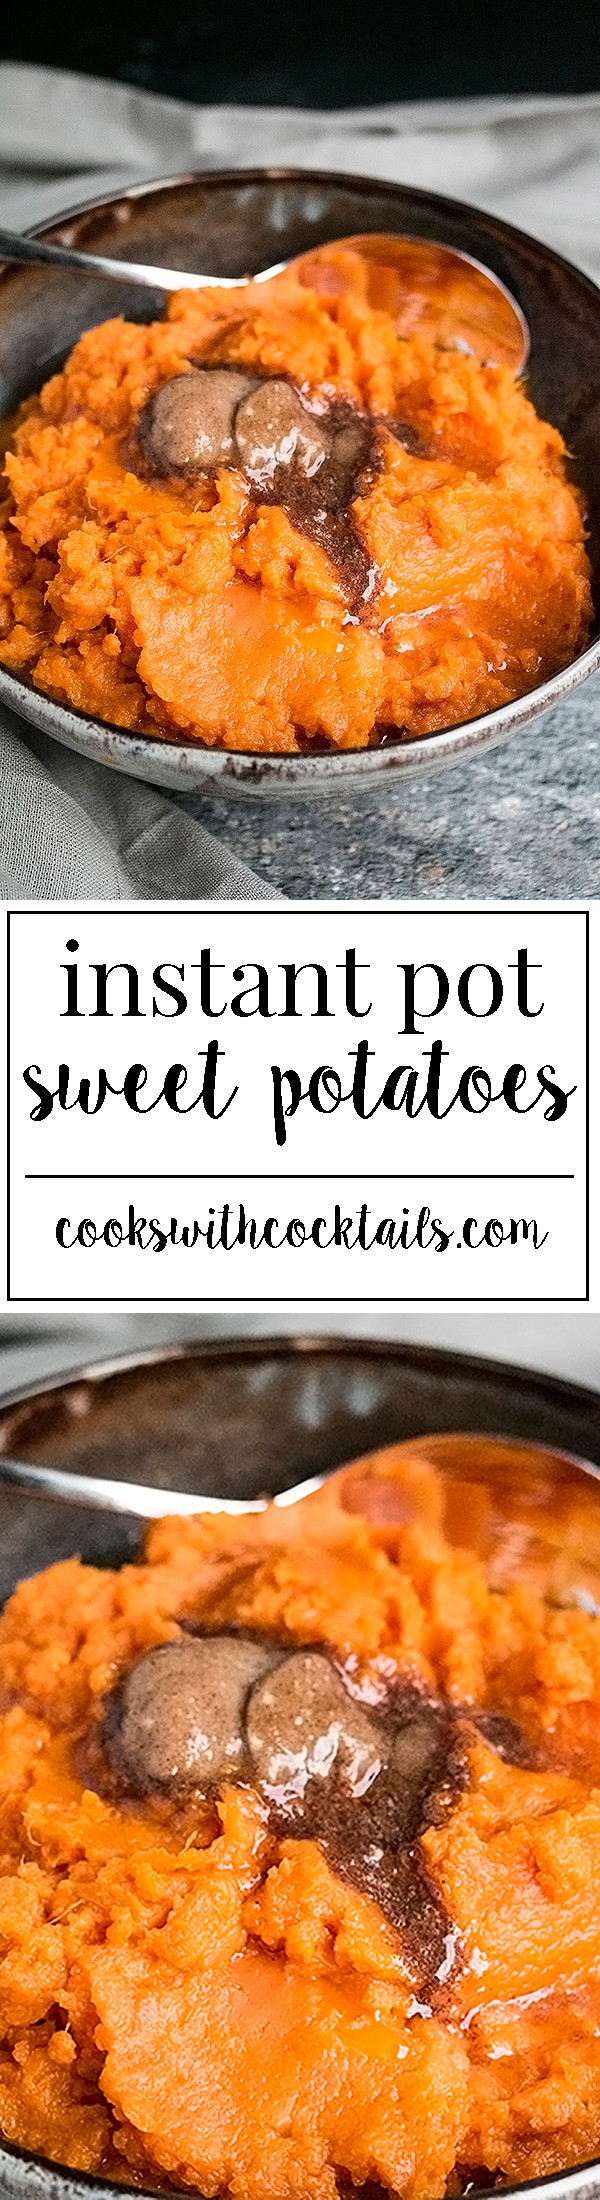 Instant Pot Sweet Potato
 Instant Pot Sweet Potatoes Cooks With Cocktails